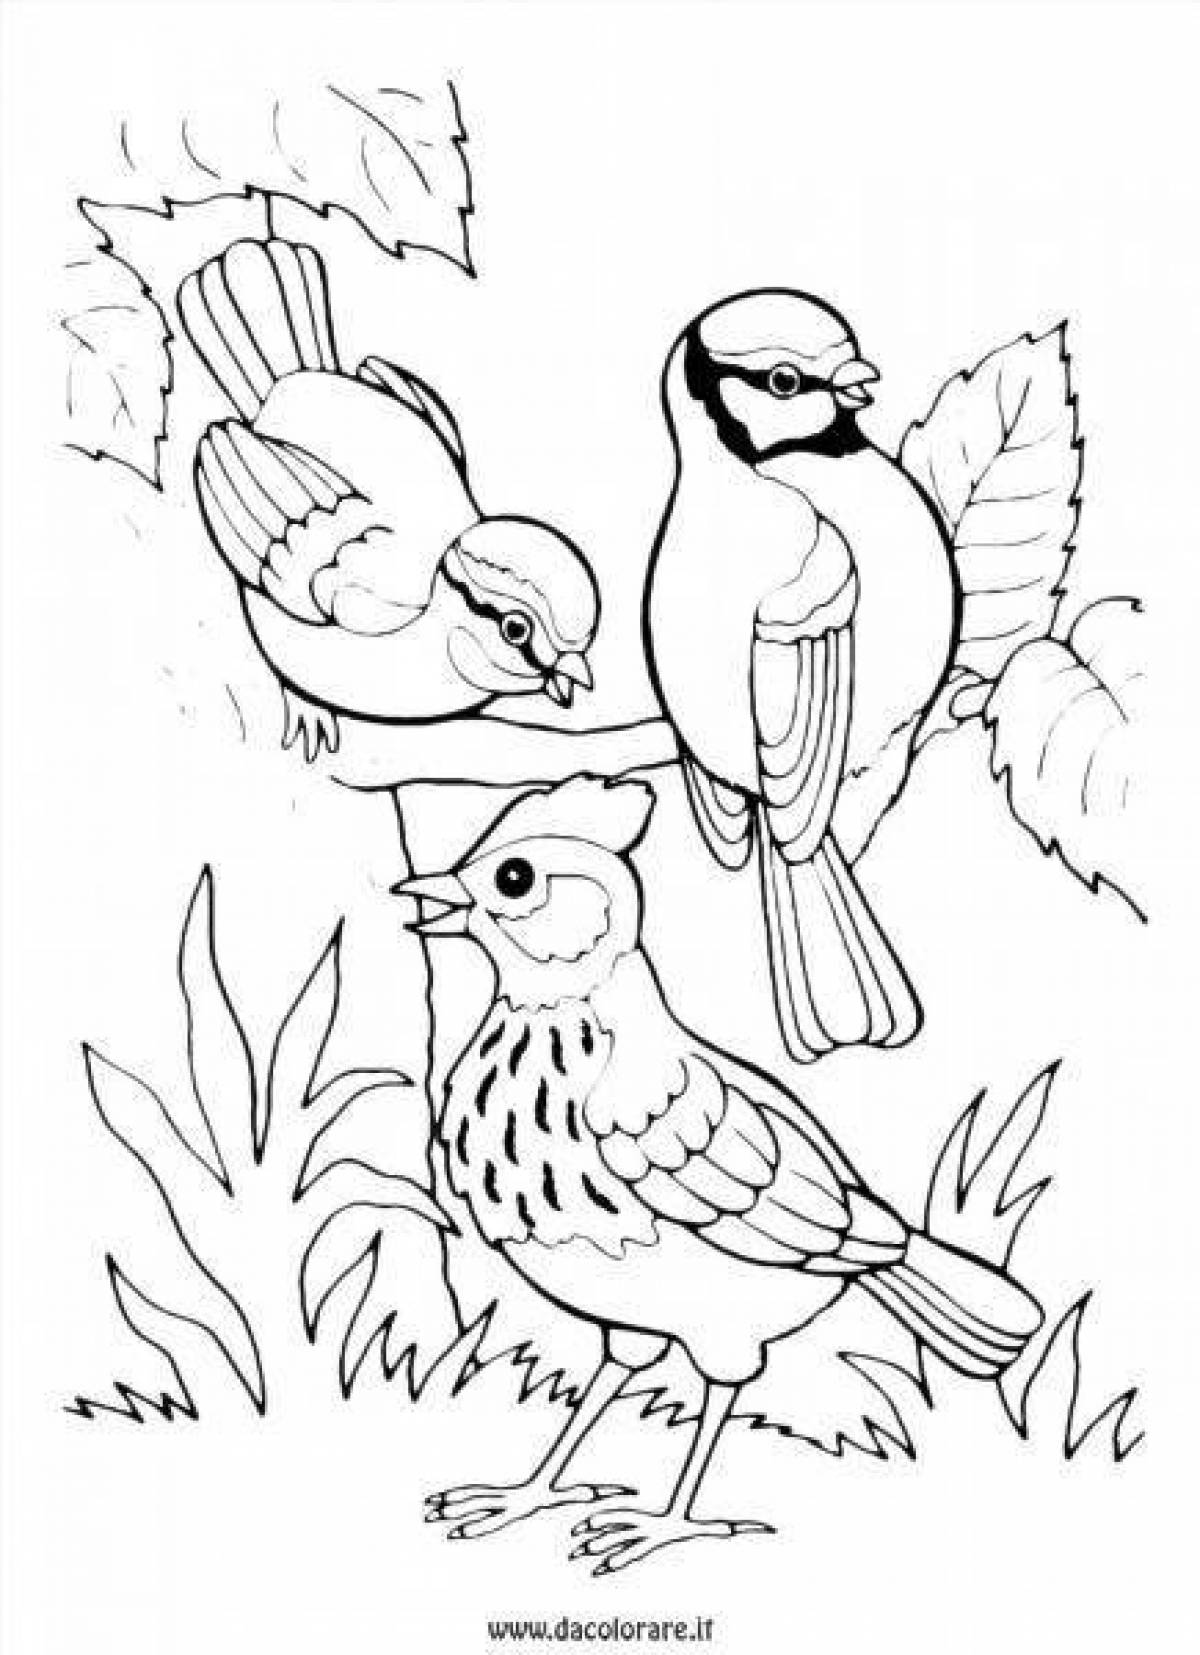 A fun coloring page for our bird friends